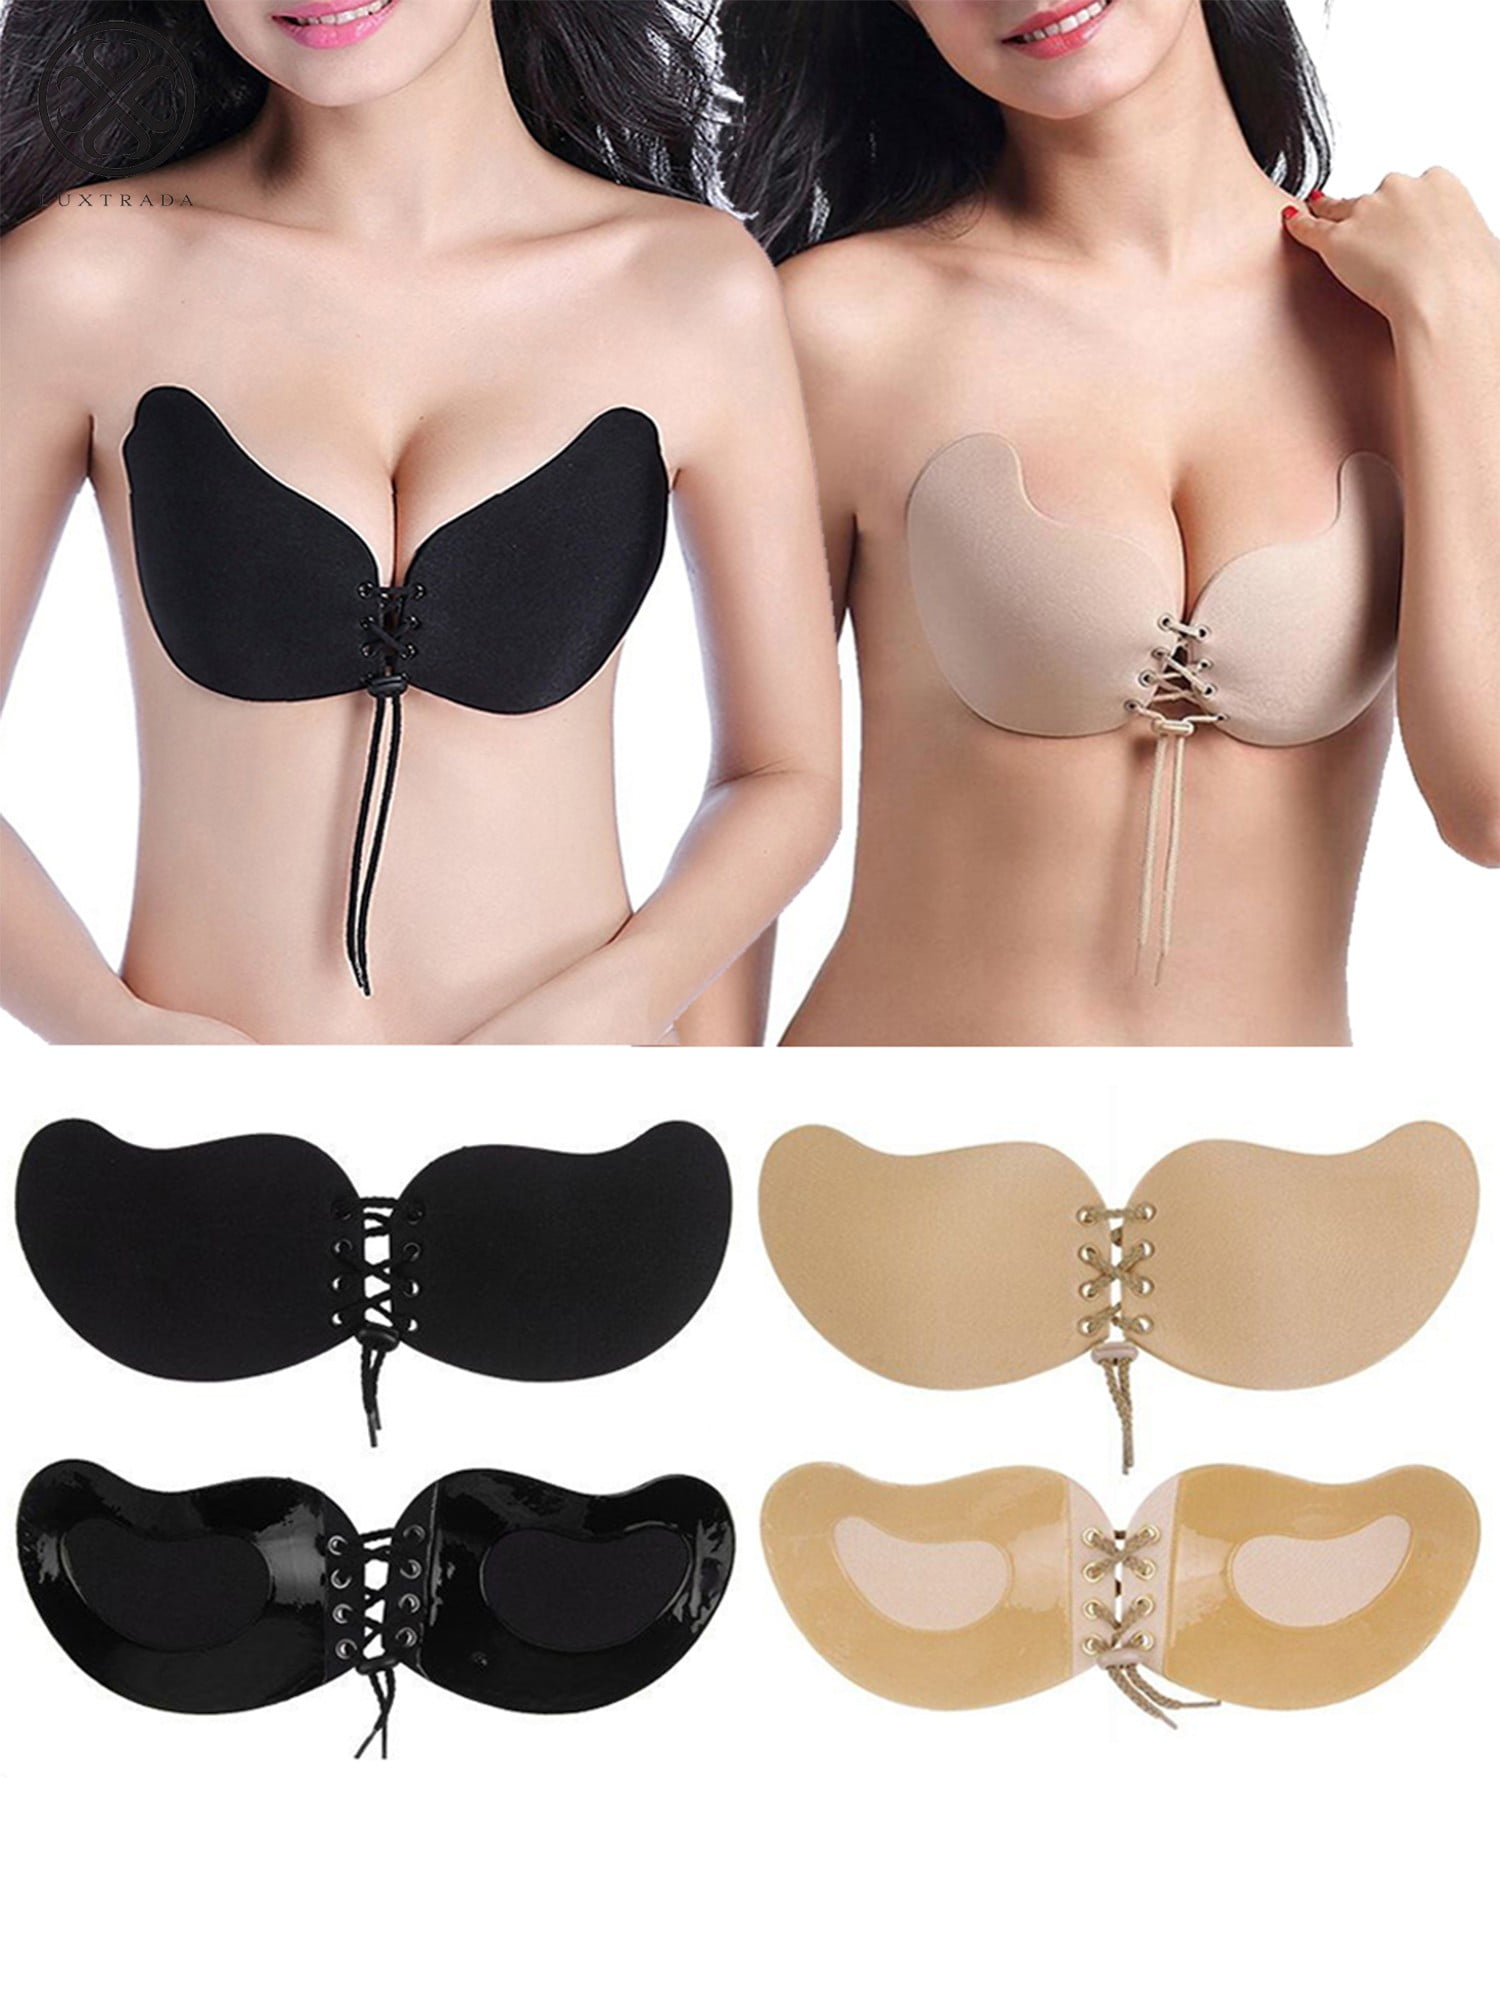 B, Black Ladies Reusable Invisible Strapless Self Adhesive Push-up Bra Stick On Gel Backless Silicone Bras for Women